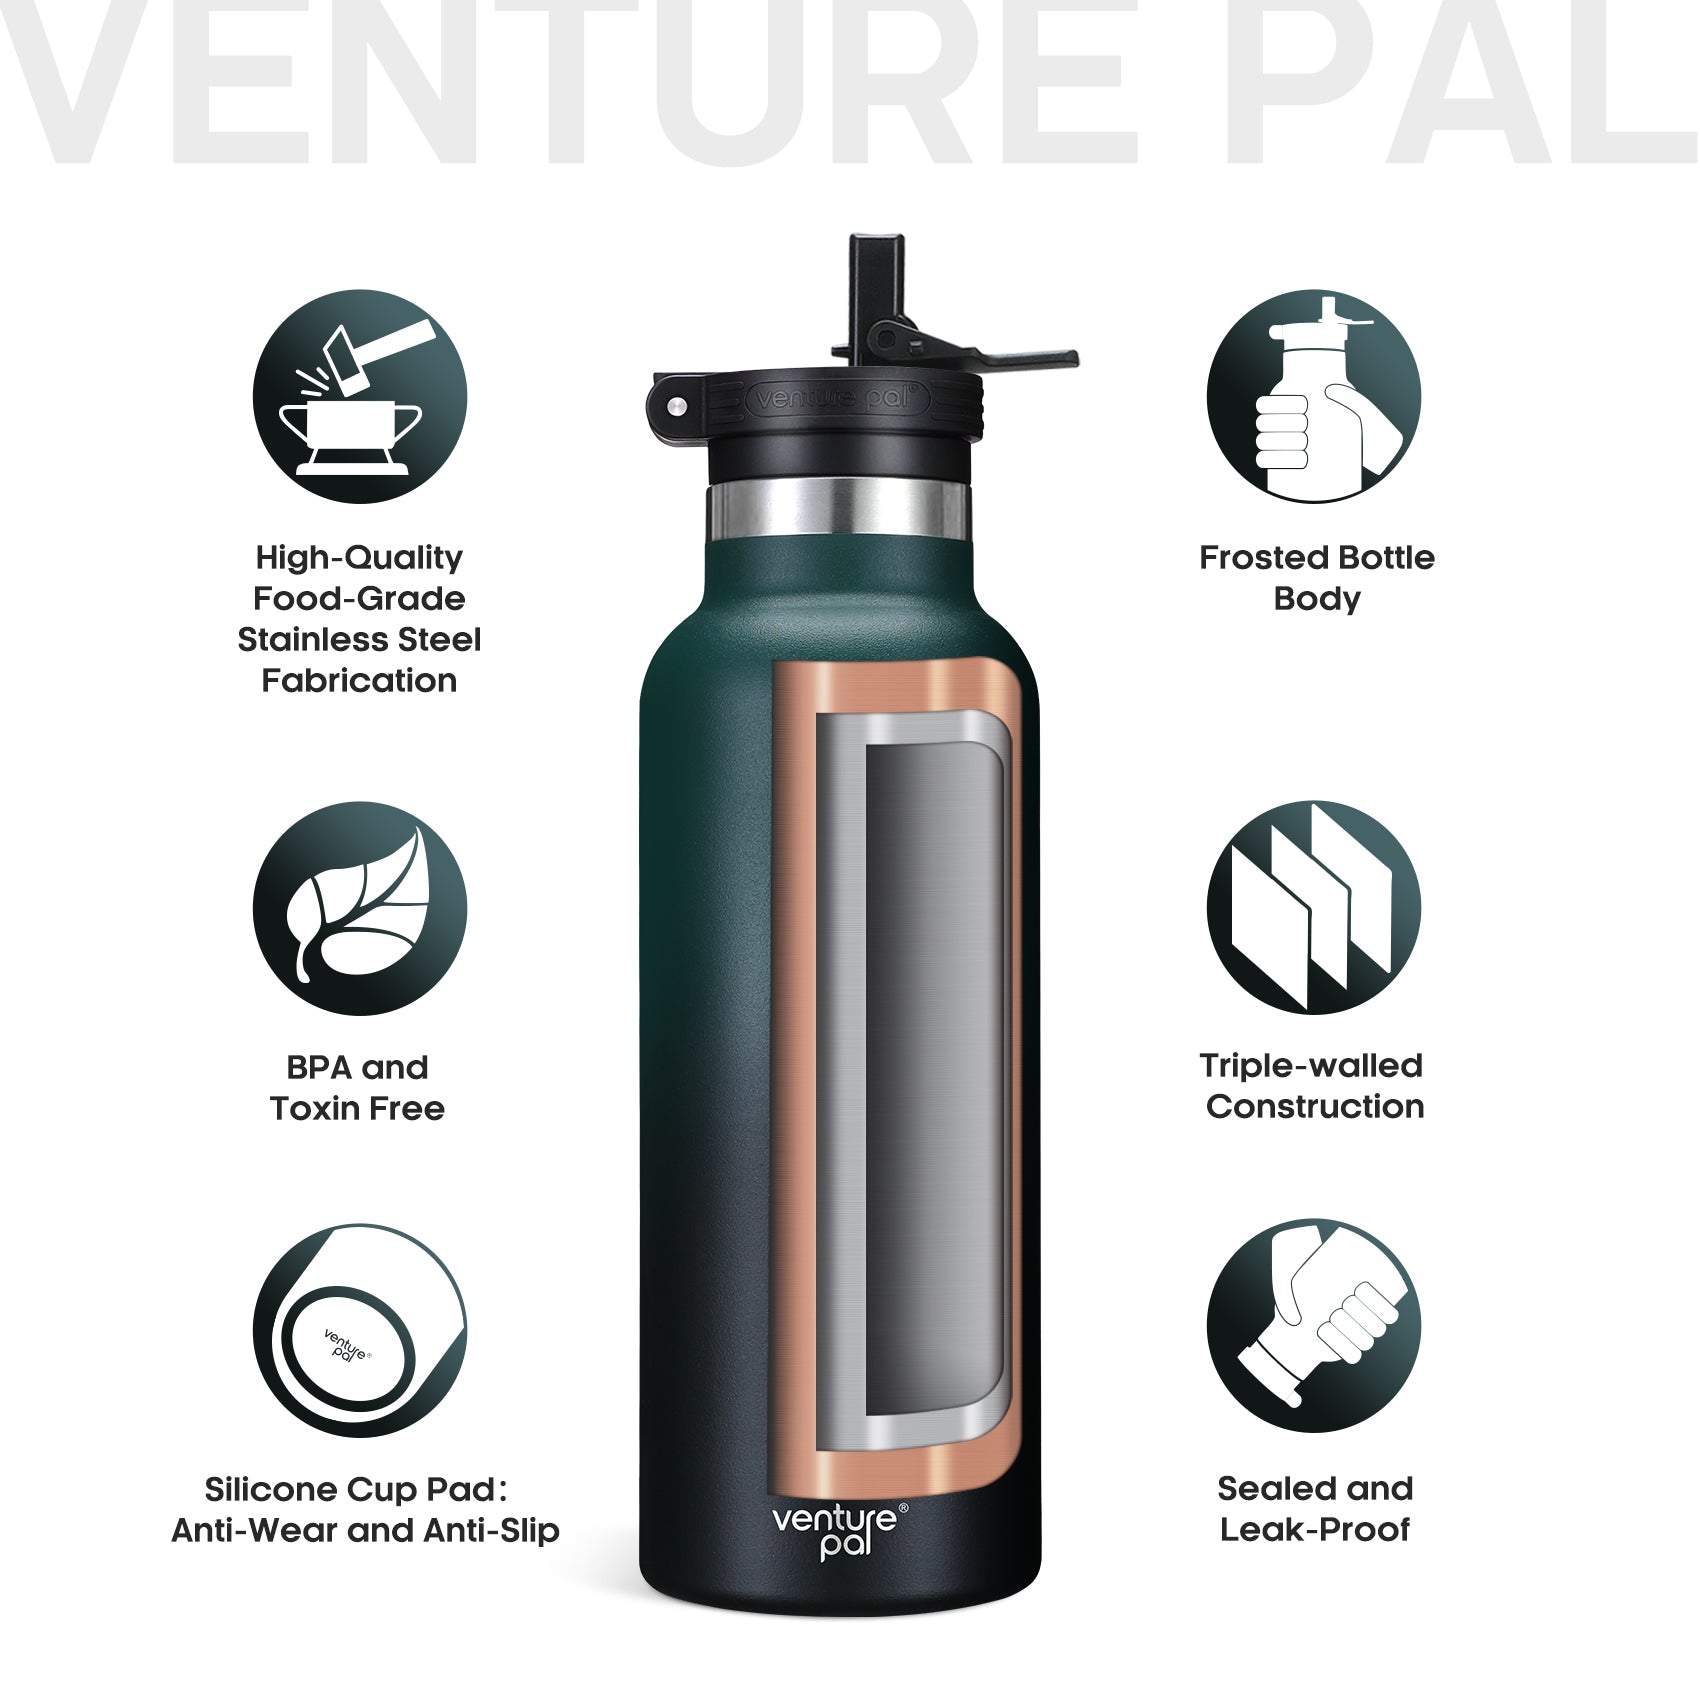 Venture Pal 22oz/32oz Motivational Water Bottle With Detachable Filter -  Comes With a Complimentary Cleaning Brush and Straw Brush - Black White -  39 requests